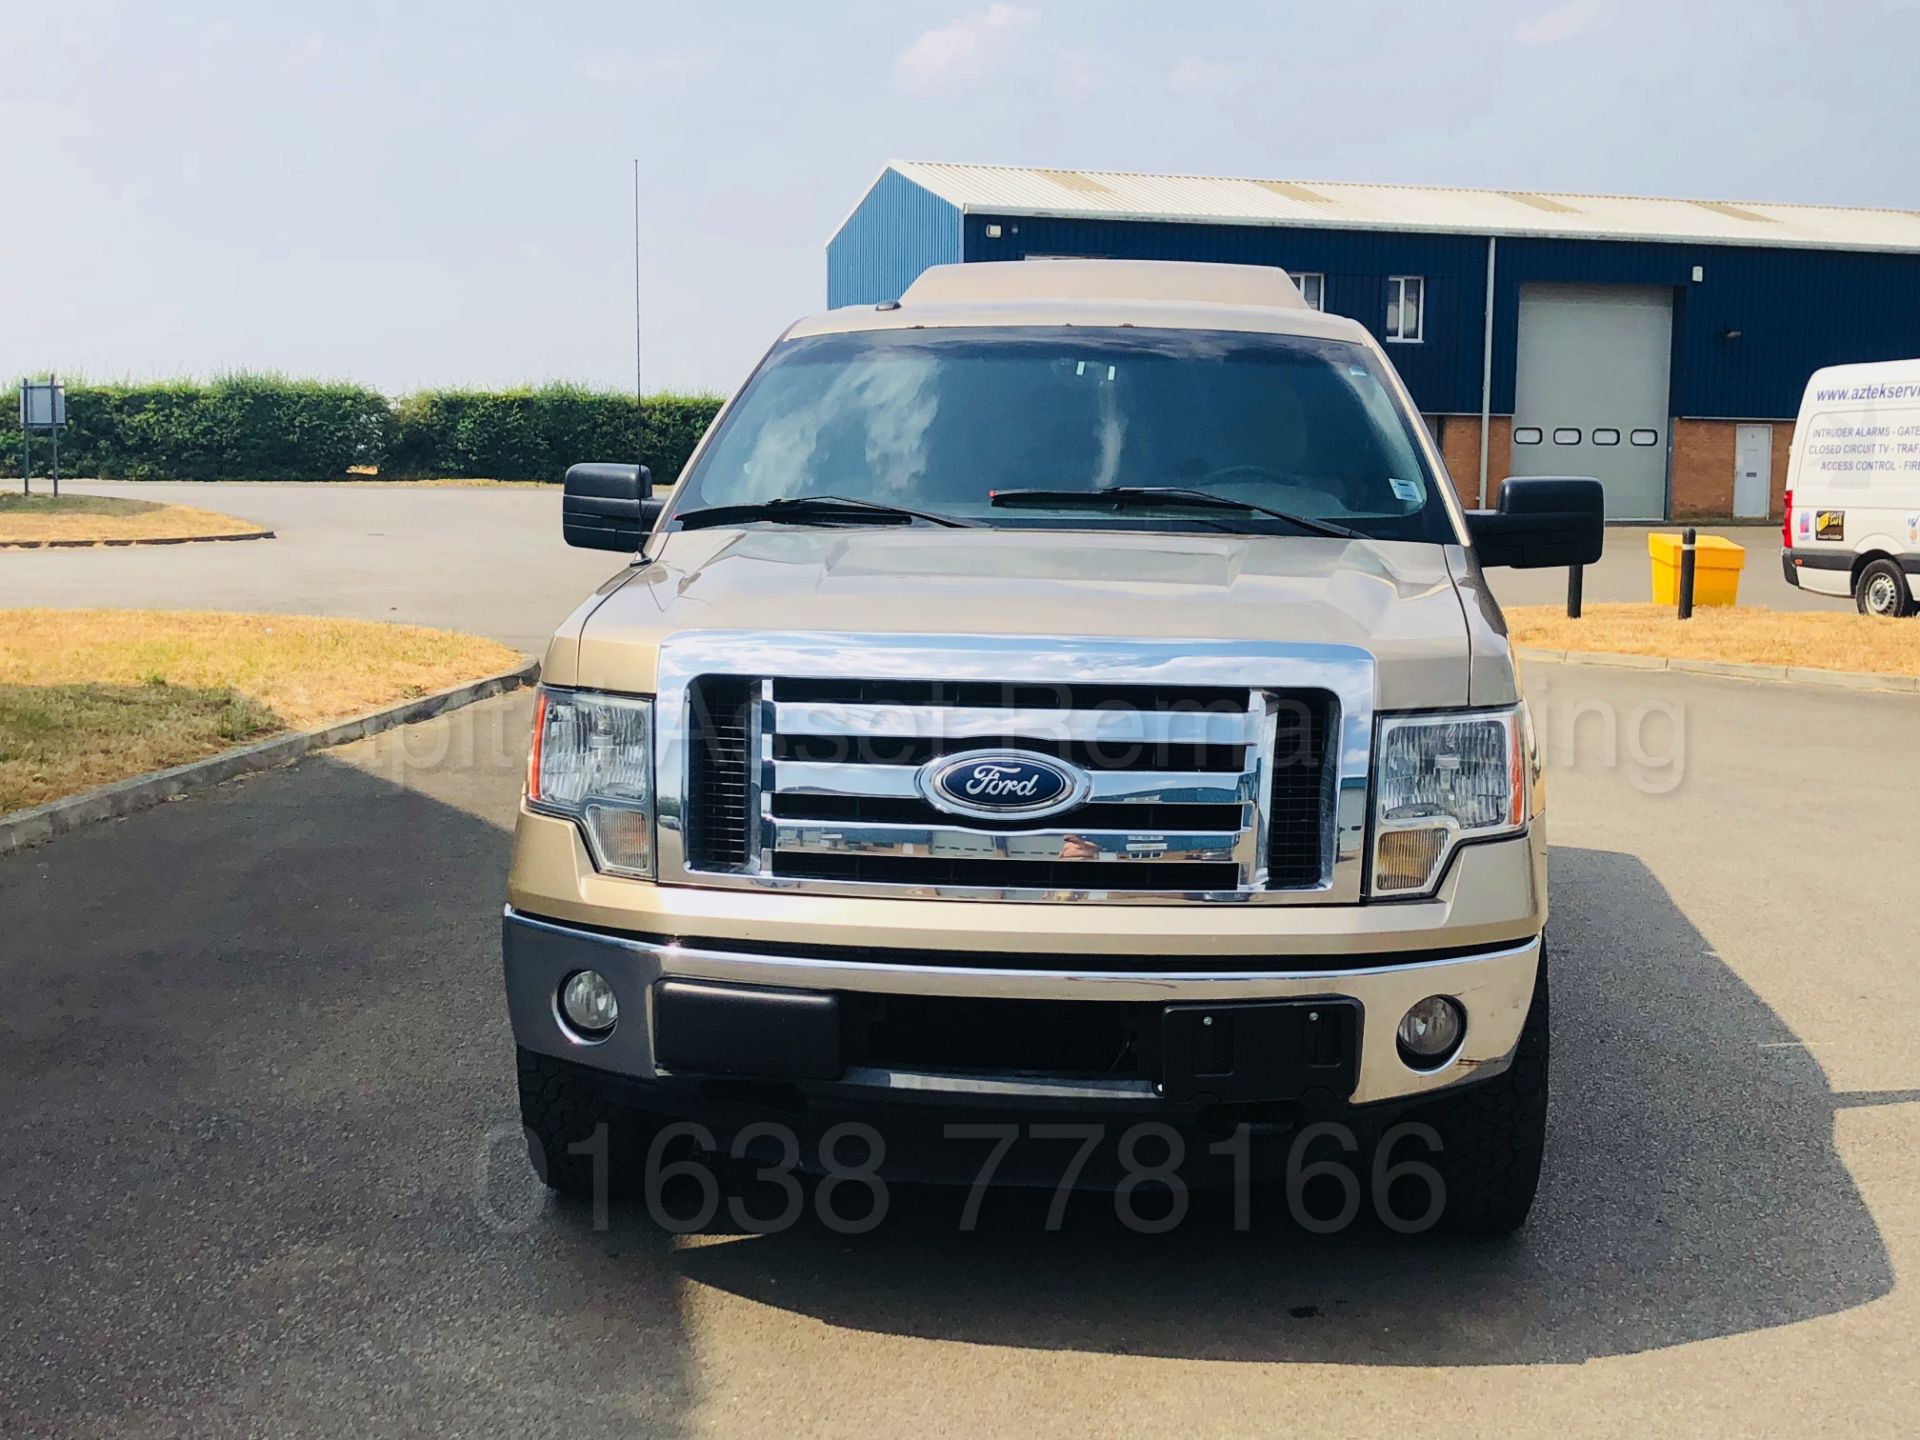 (On Sale) FORD F-150 5.4 V8 XLT EDITION KING-CAB (2012) MODEL**4X4**6 SEATER**AUTOMATIC *TOP SPEC* - Bild 4 aus 52